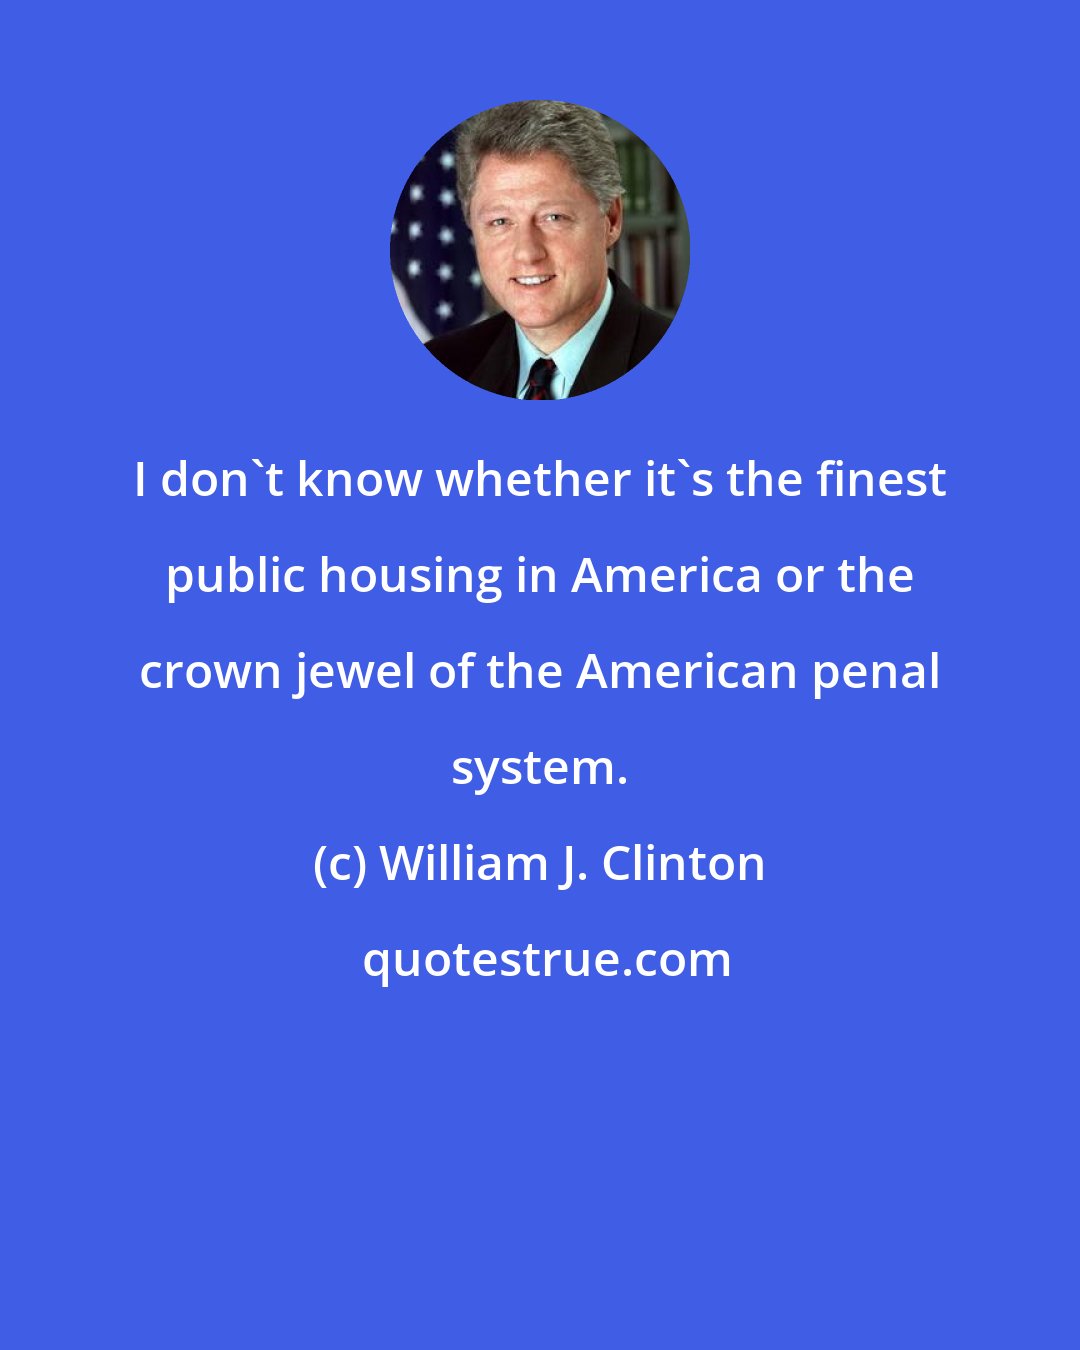 William J. Clinton: I don't know whether it's the finest public housing in America or the crown jewel of the American penal system.